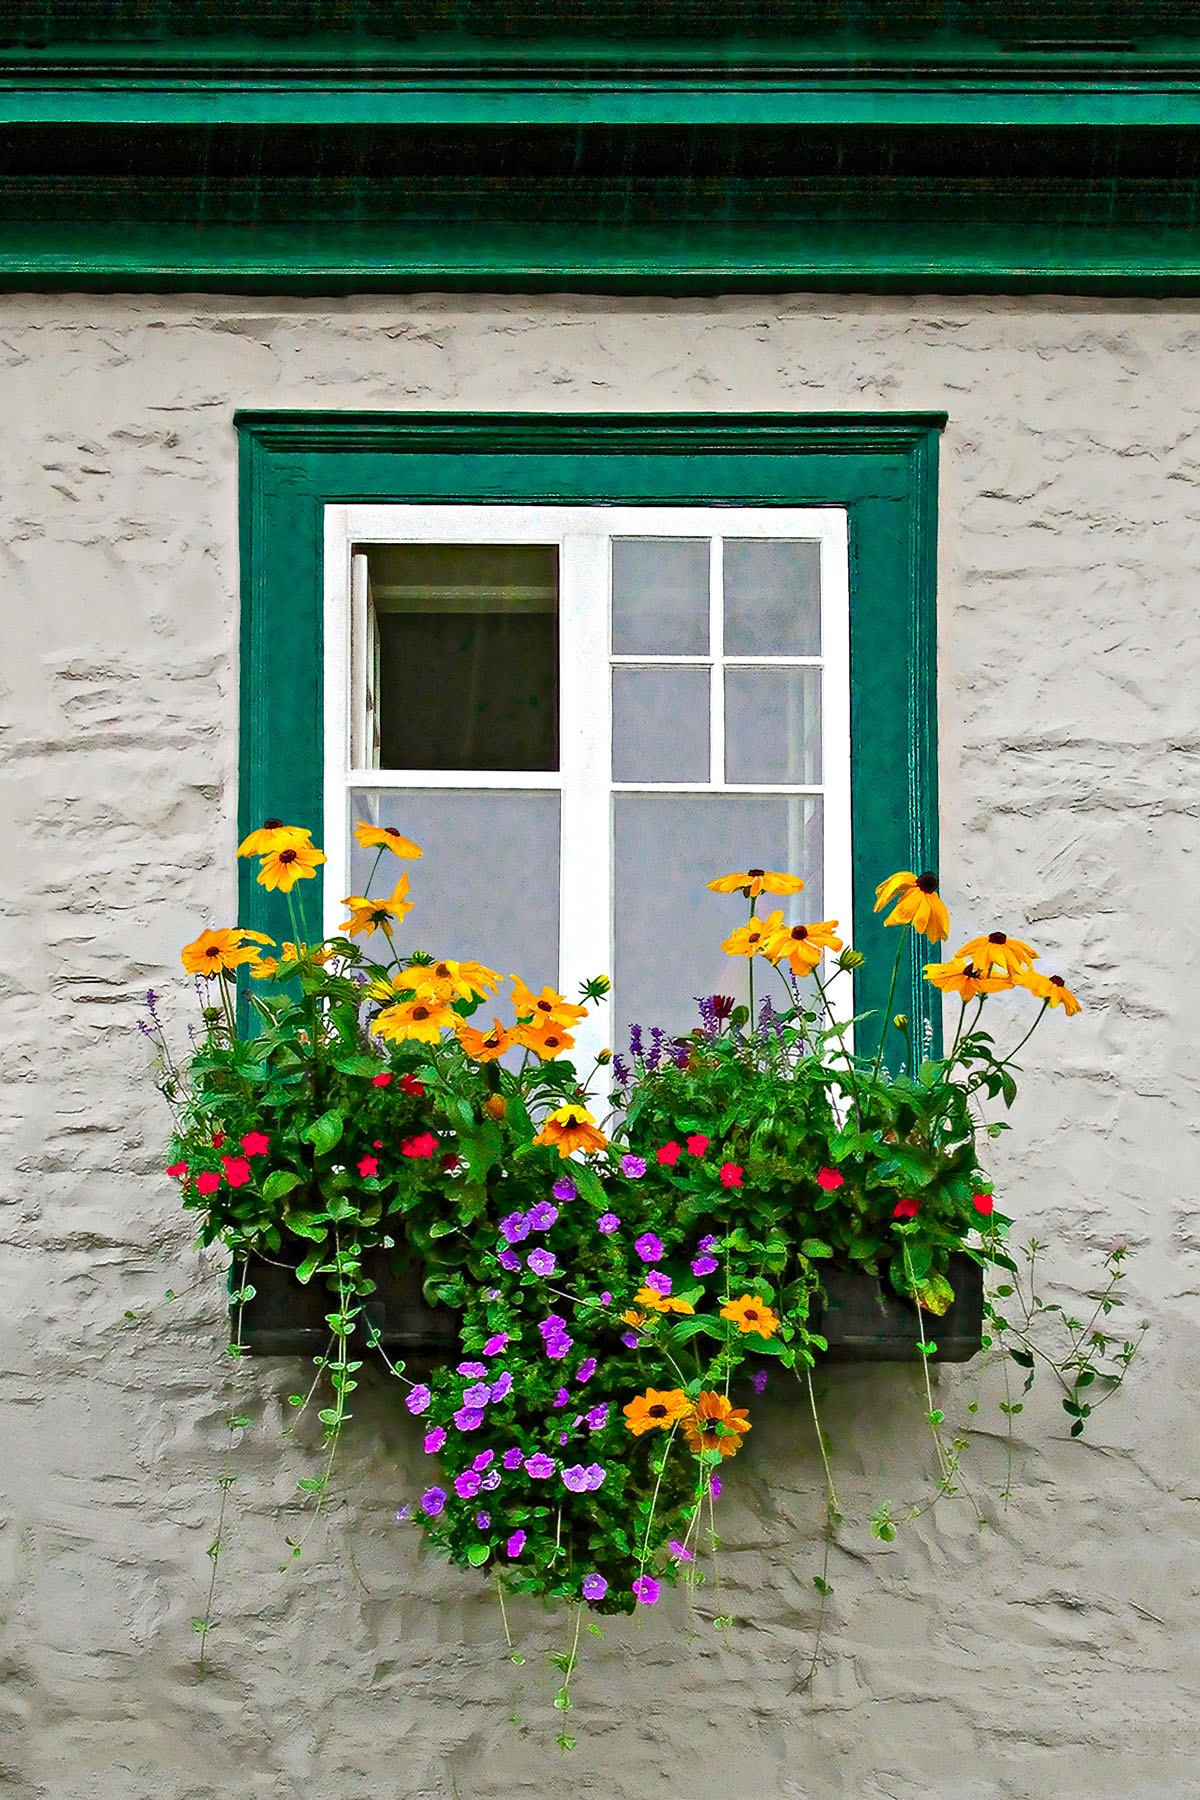 WINDOW-BOX - We saw this window as we were walking back to our car after spending a day in the rain in Quebec.  As I was about to photograph it, some one closed the window,and then saw me, opened it back up and moved aside. He must have been a photographer!